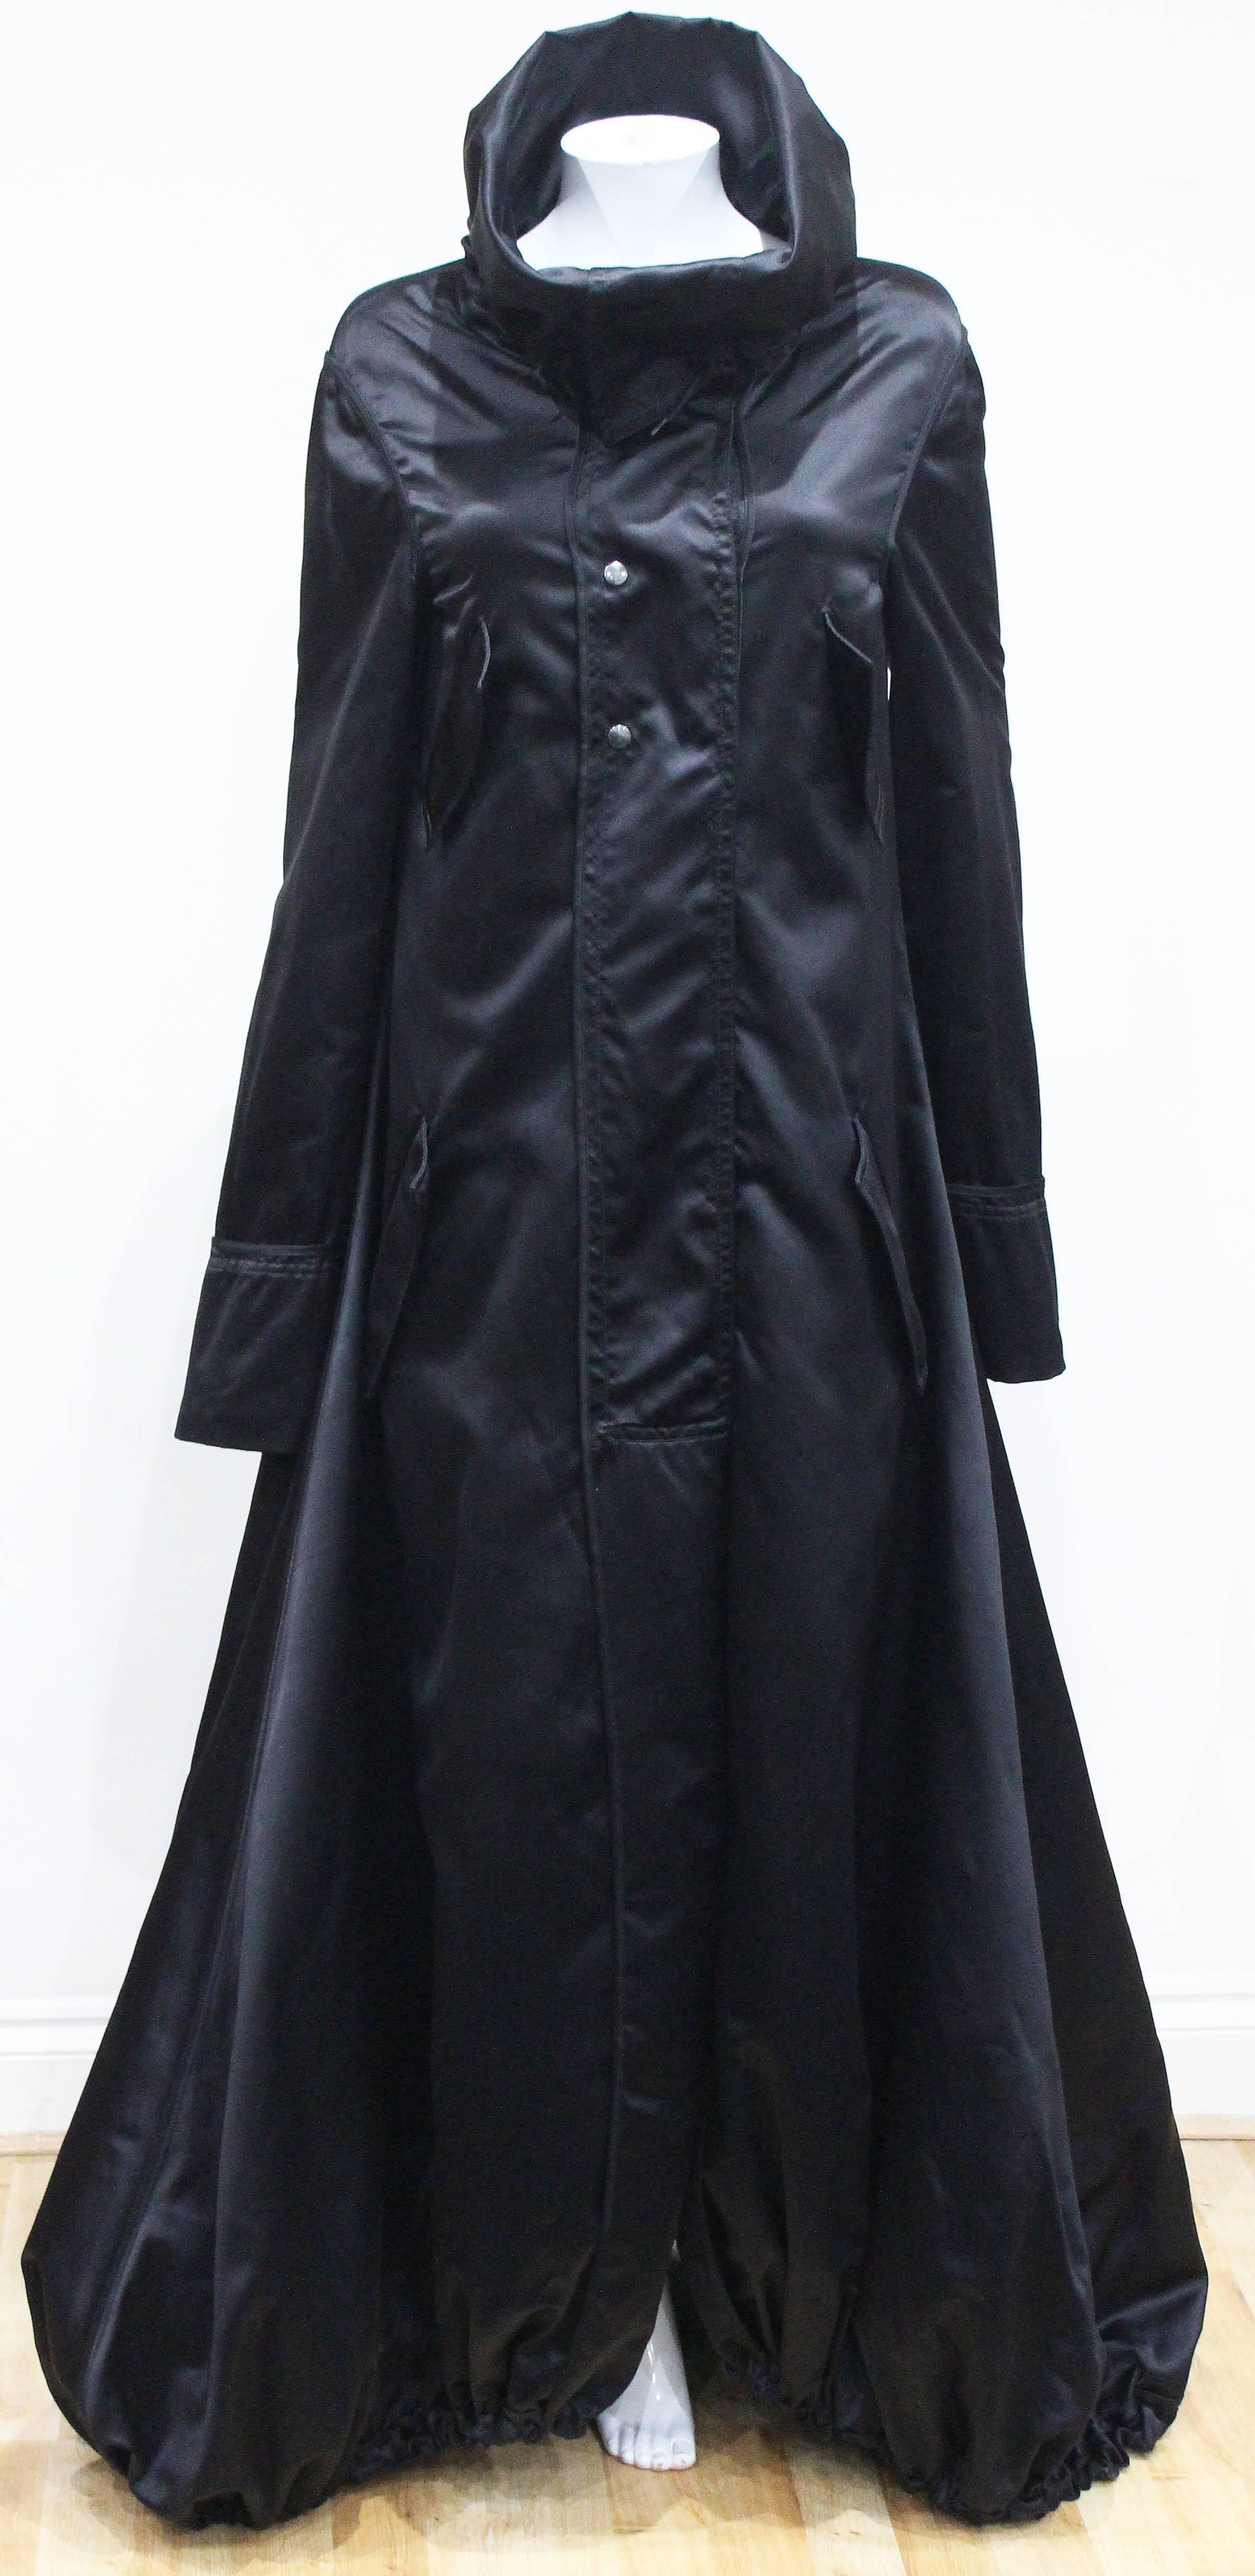 Women's Exceptional Tom Ford for Gucci Runway Black Silk Parachute Coat, Fall 2002